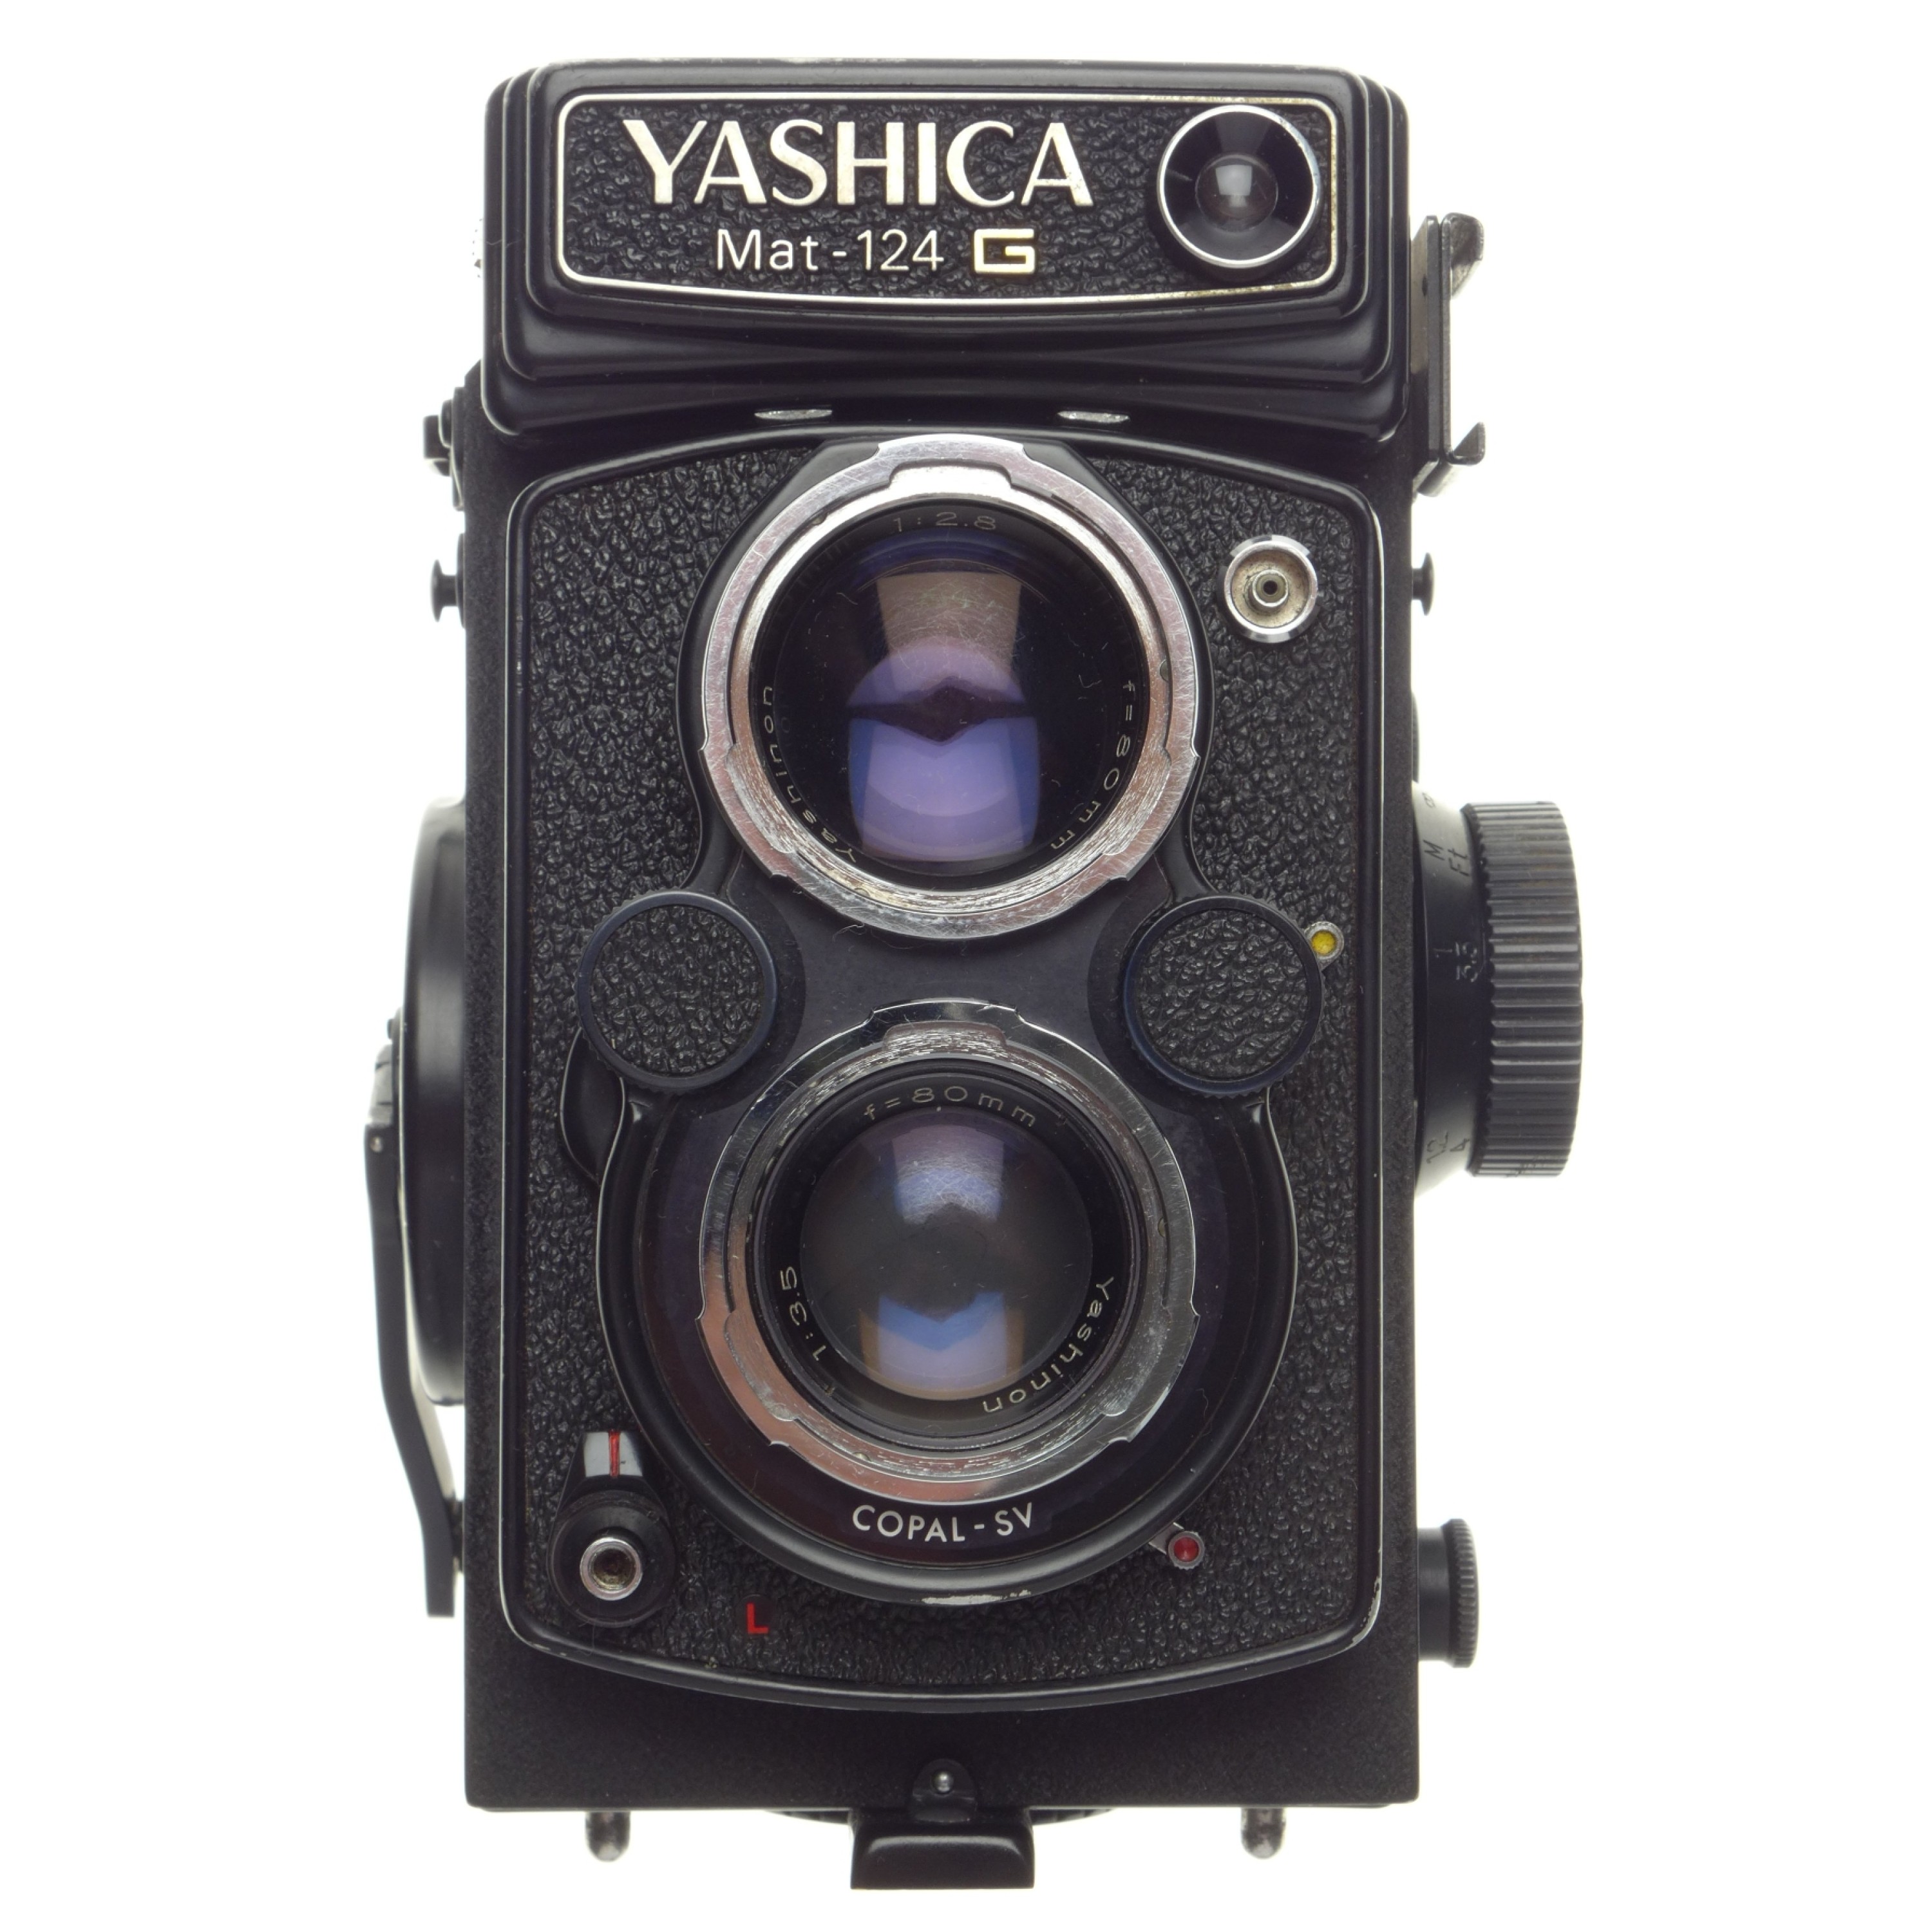 Yashica Mat-124 G Twin Lens Reflex TLR 120 film camera coated